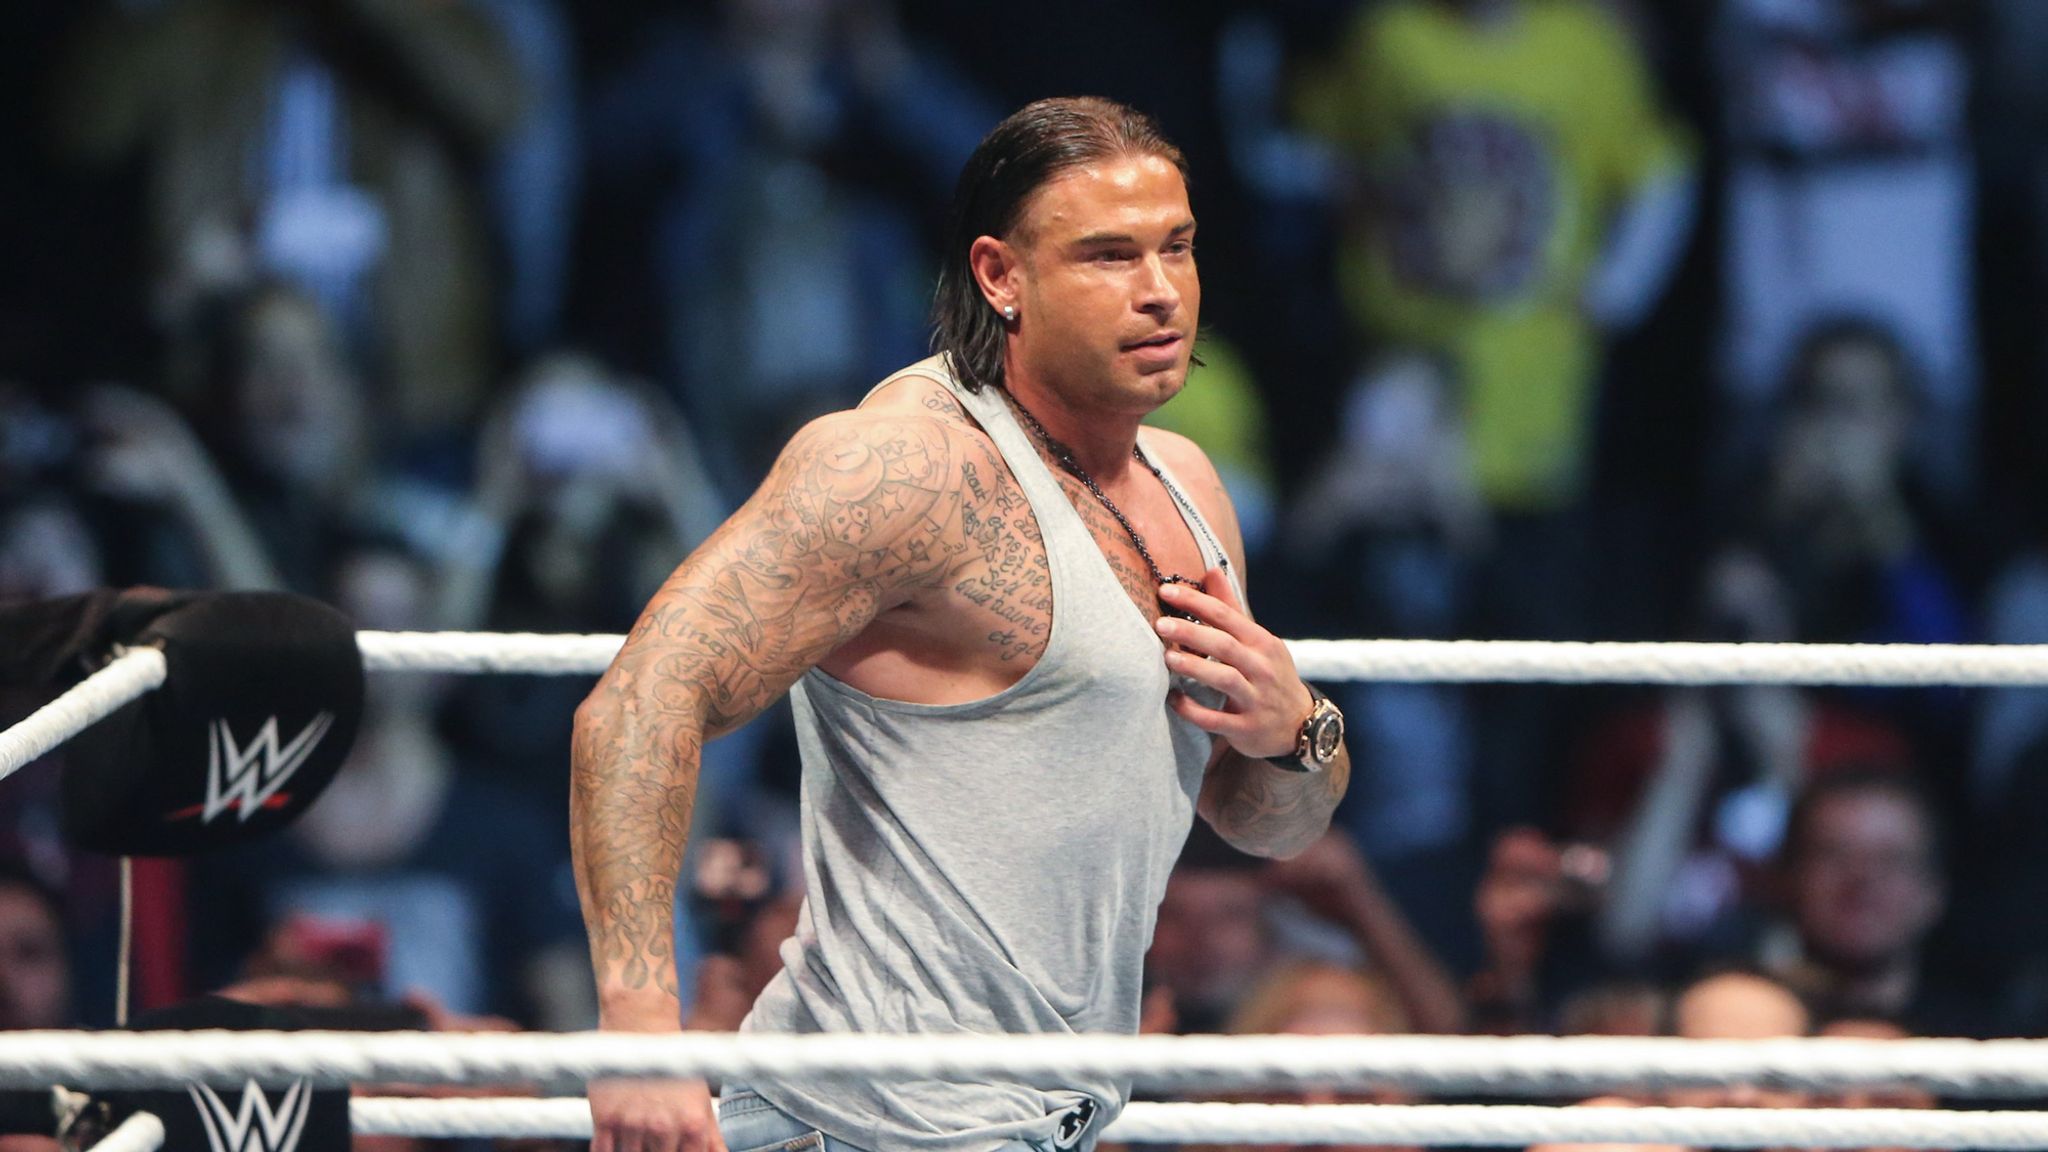 Tim Wiese: Former Germany and Werder goalkeeper at WWE live event | News | Sky Sports